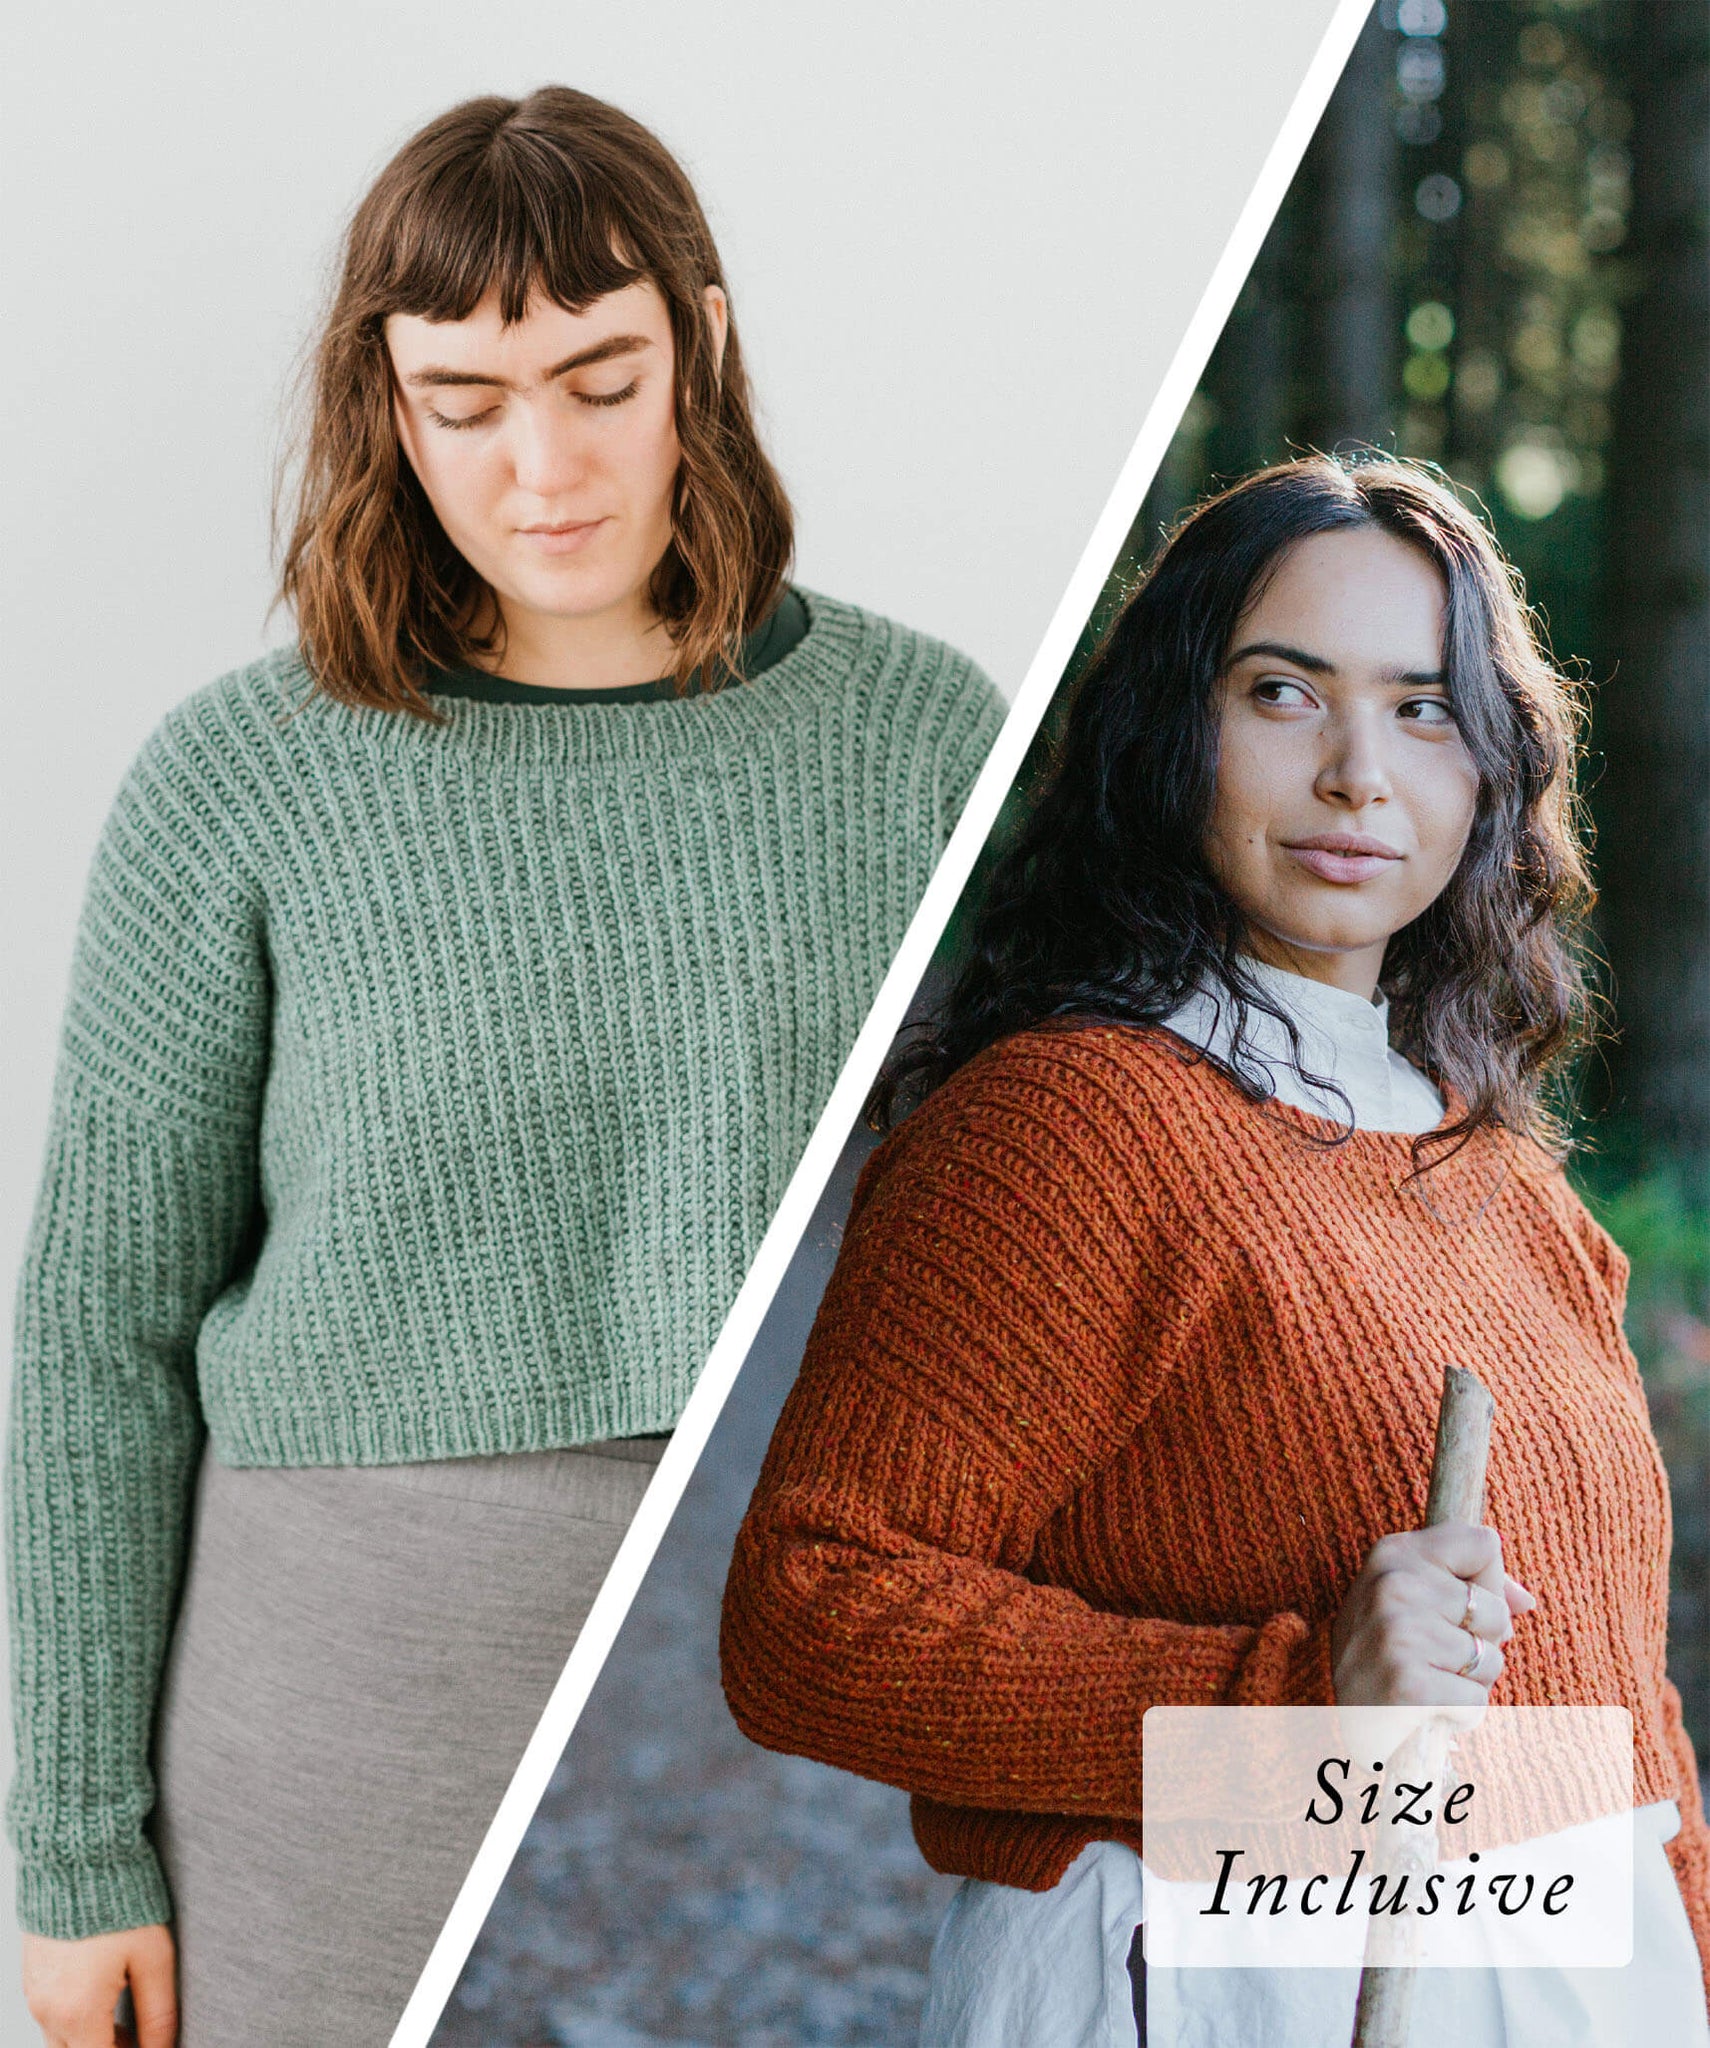 Dunstan Pullover | Knitting Pattern by Isabelle Ryan shown in Shelter and Tones yarn | COVER